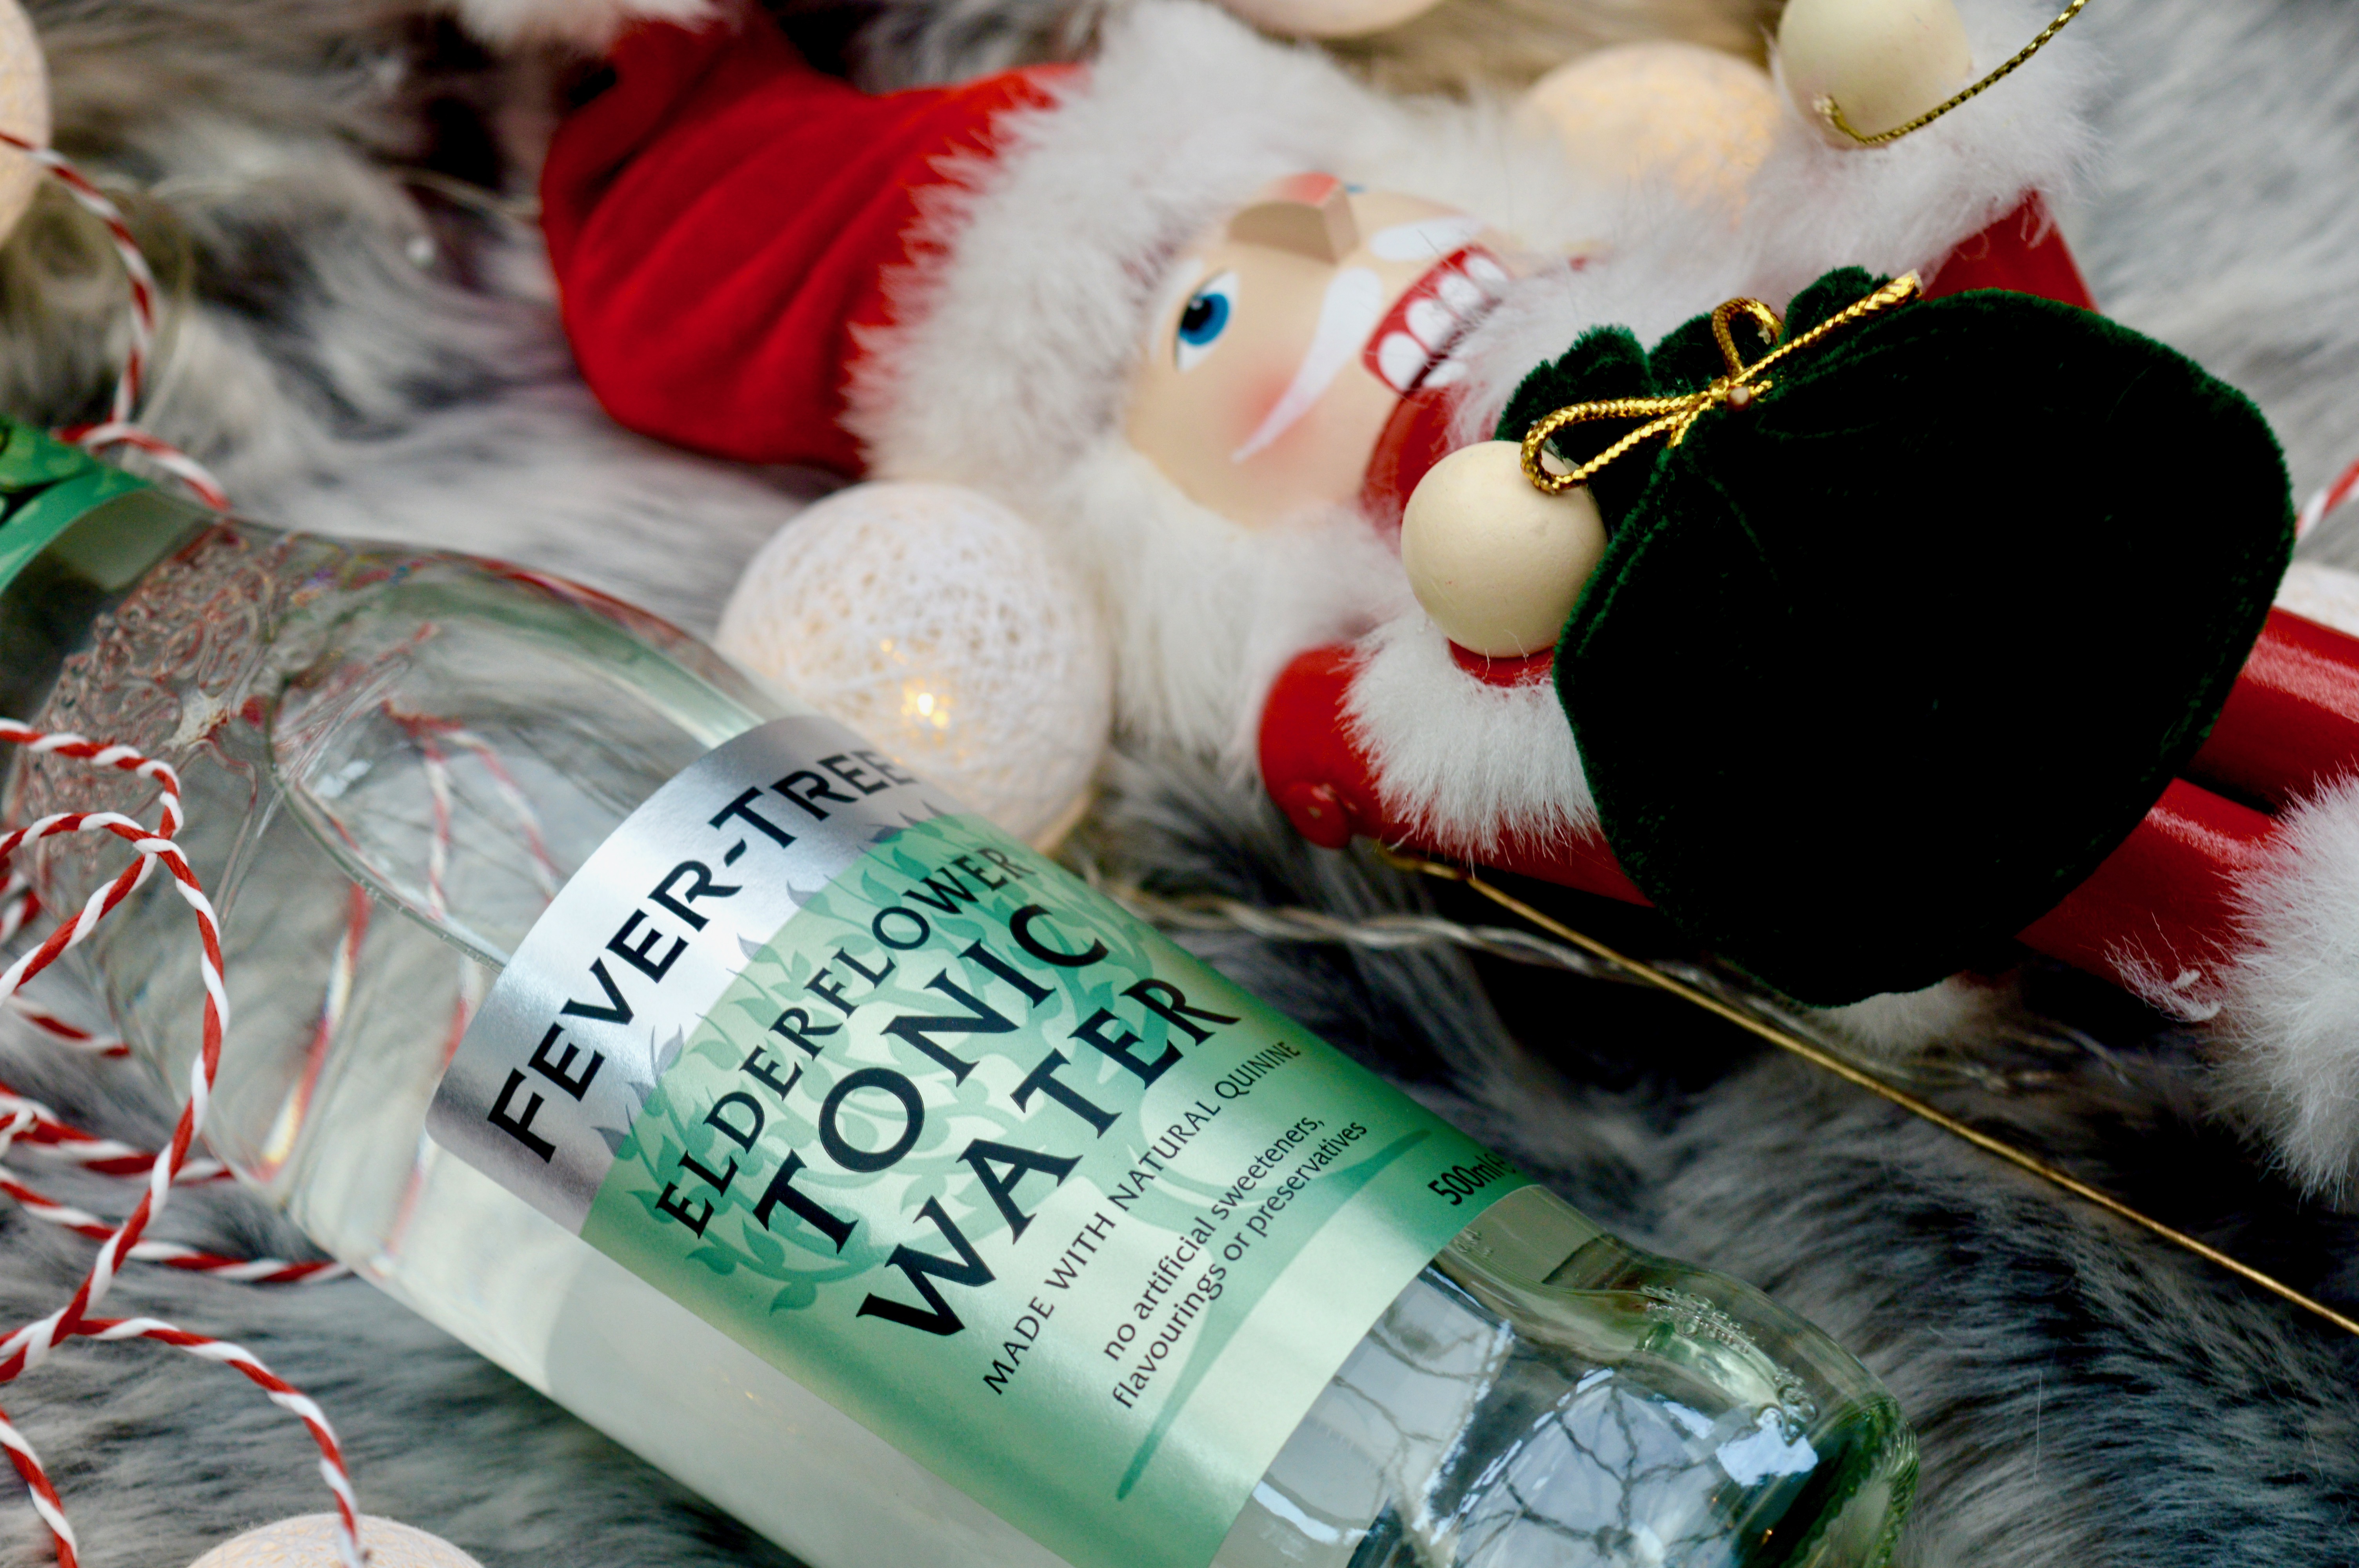 Fever-Tree Elderflower Tonic Water | What to buy a gin lover | Christmas Gift Guide | Elle Blonde Luxury Lifestyle Destination Blog